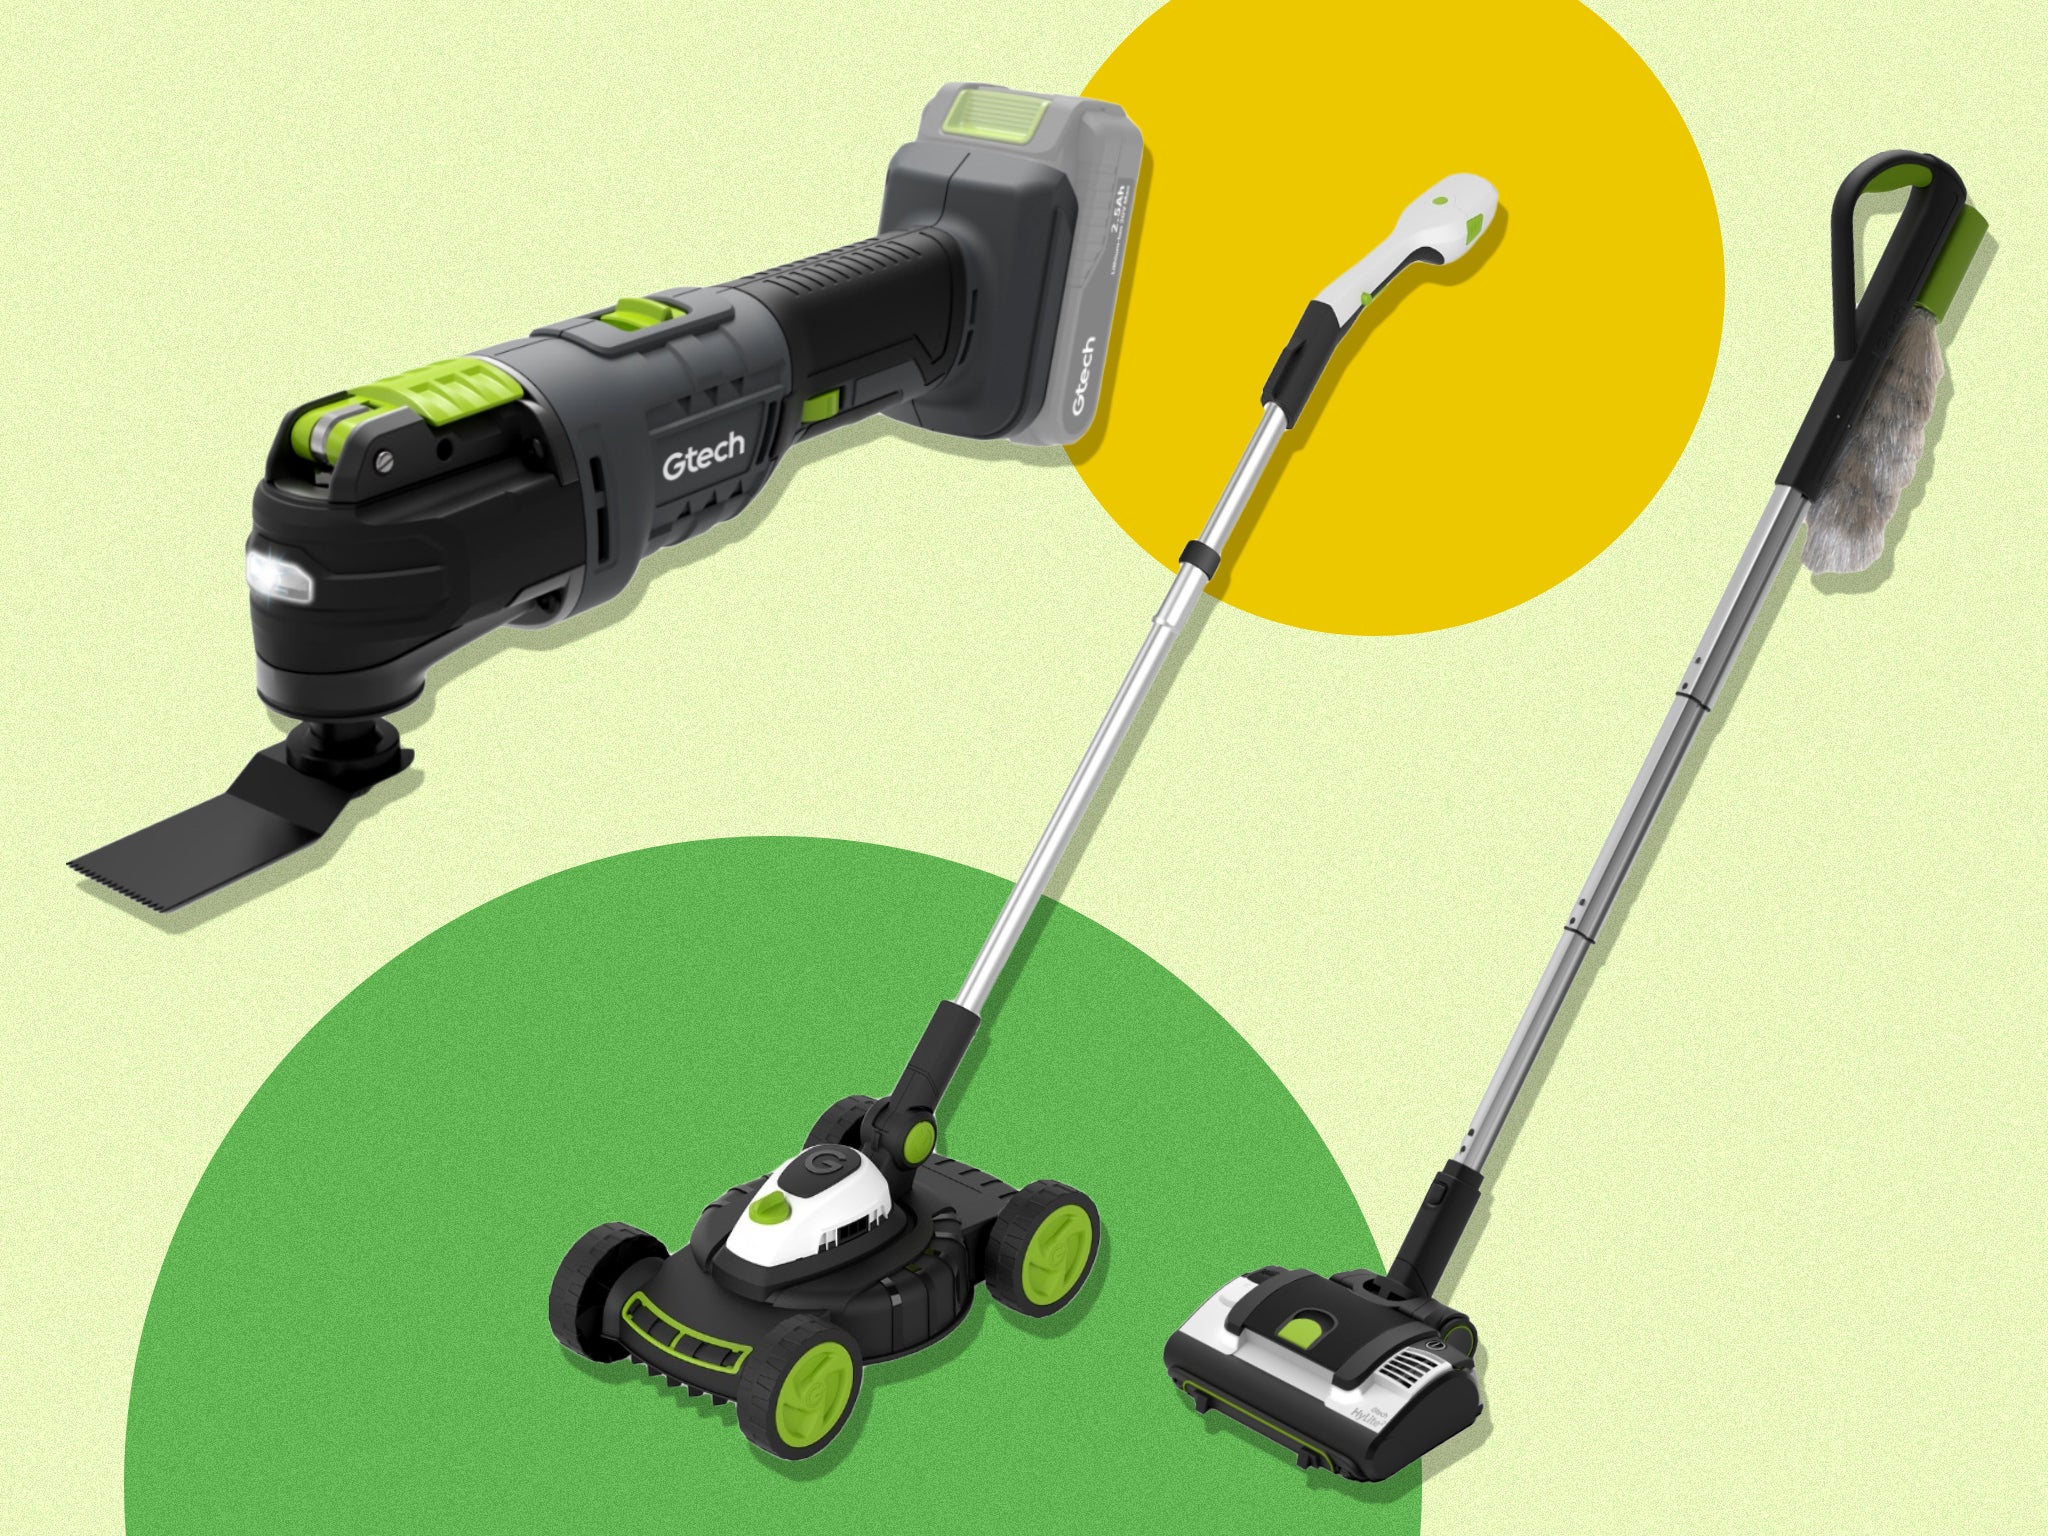 From power tools to vacuum cleaners, there are big savings to be made at Gtech